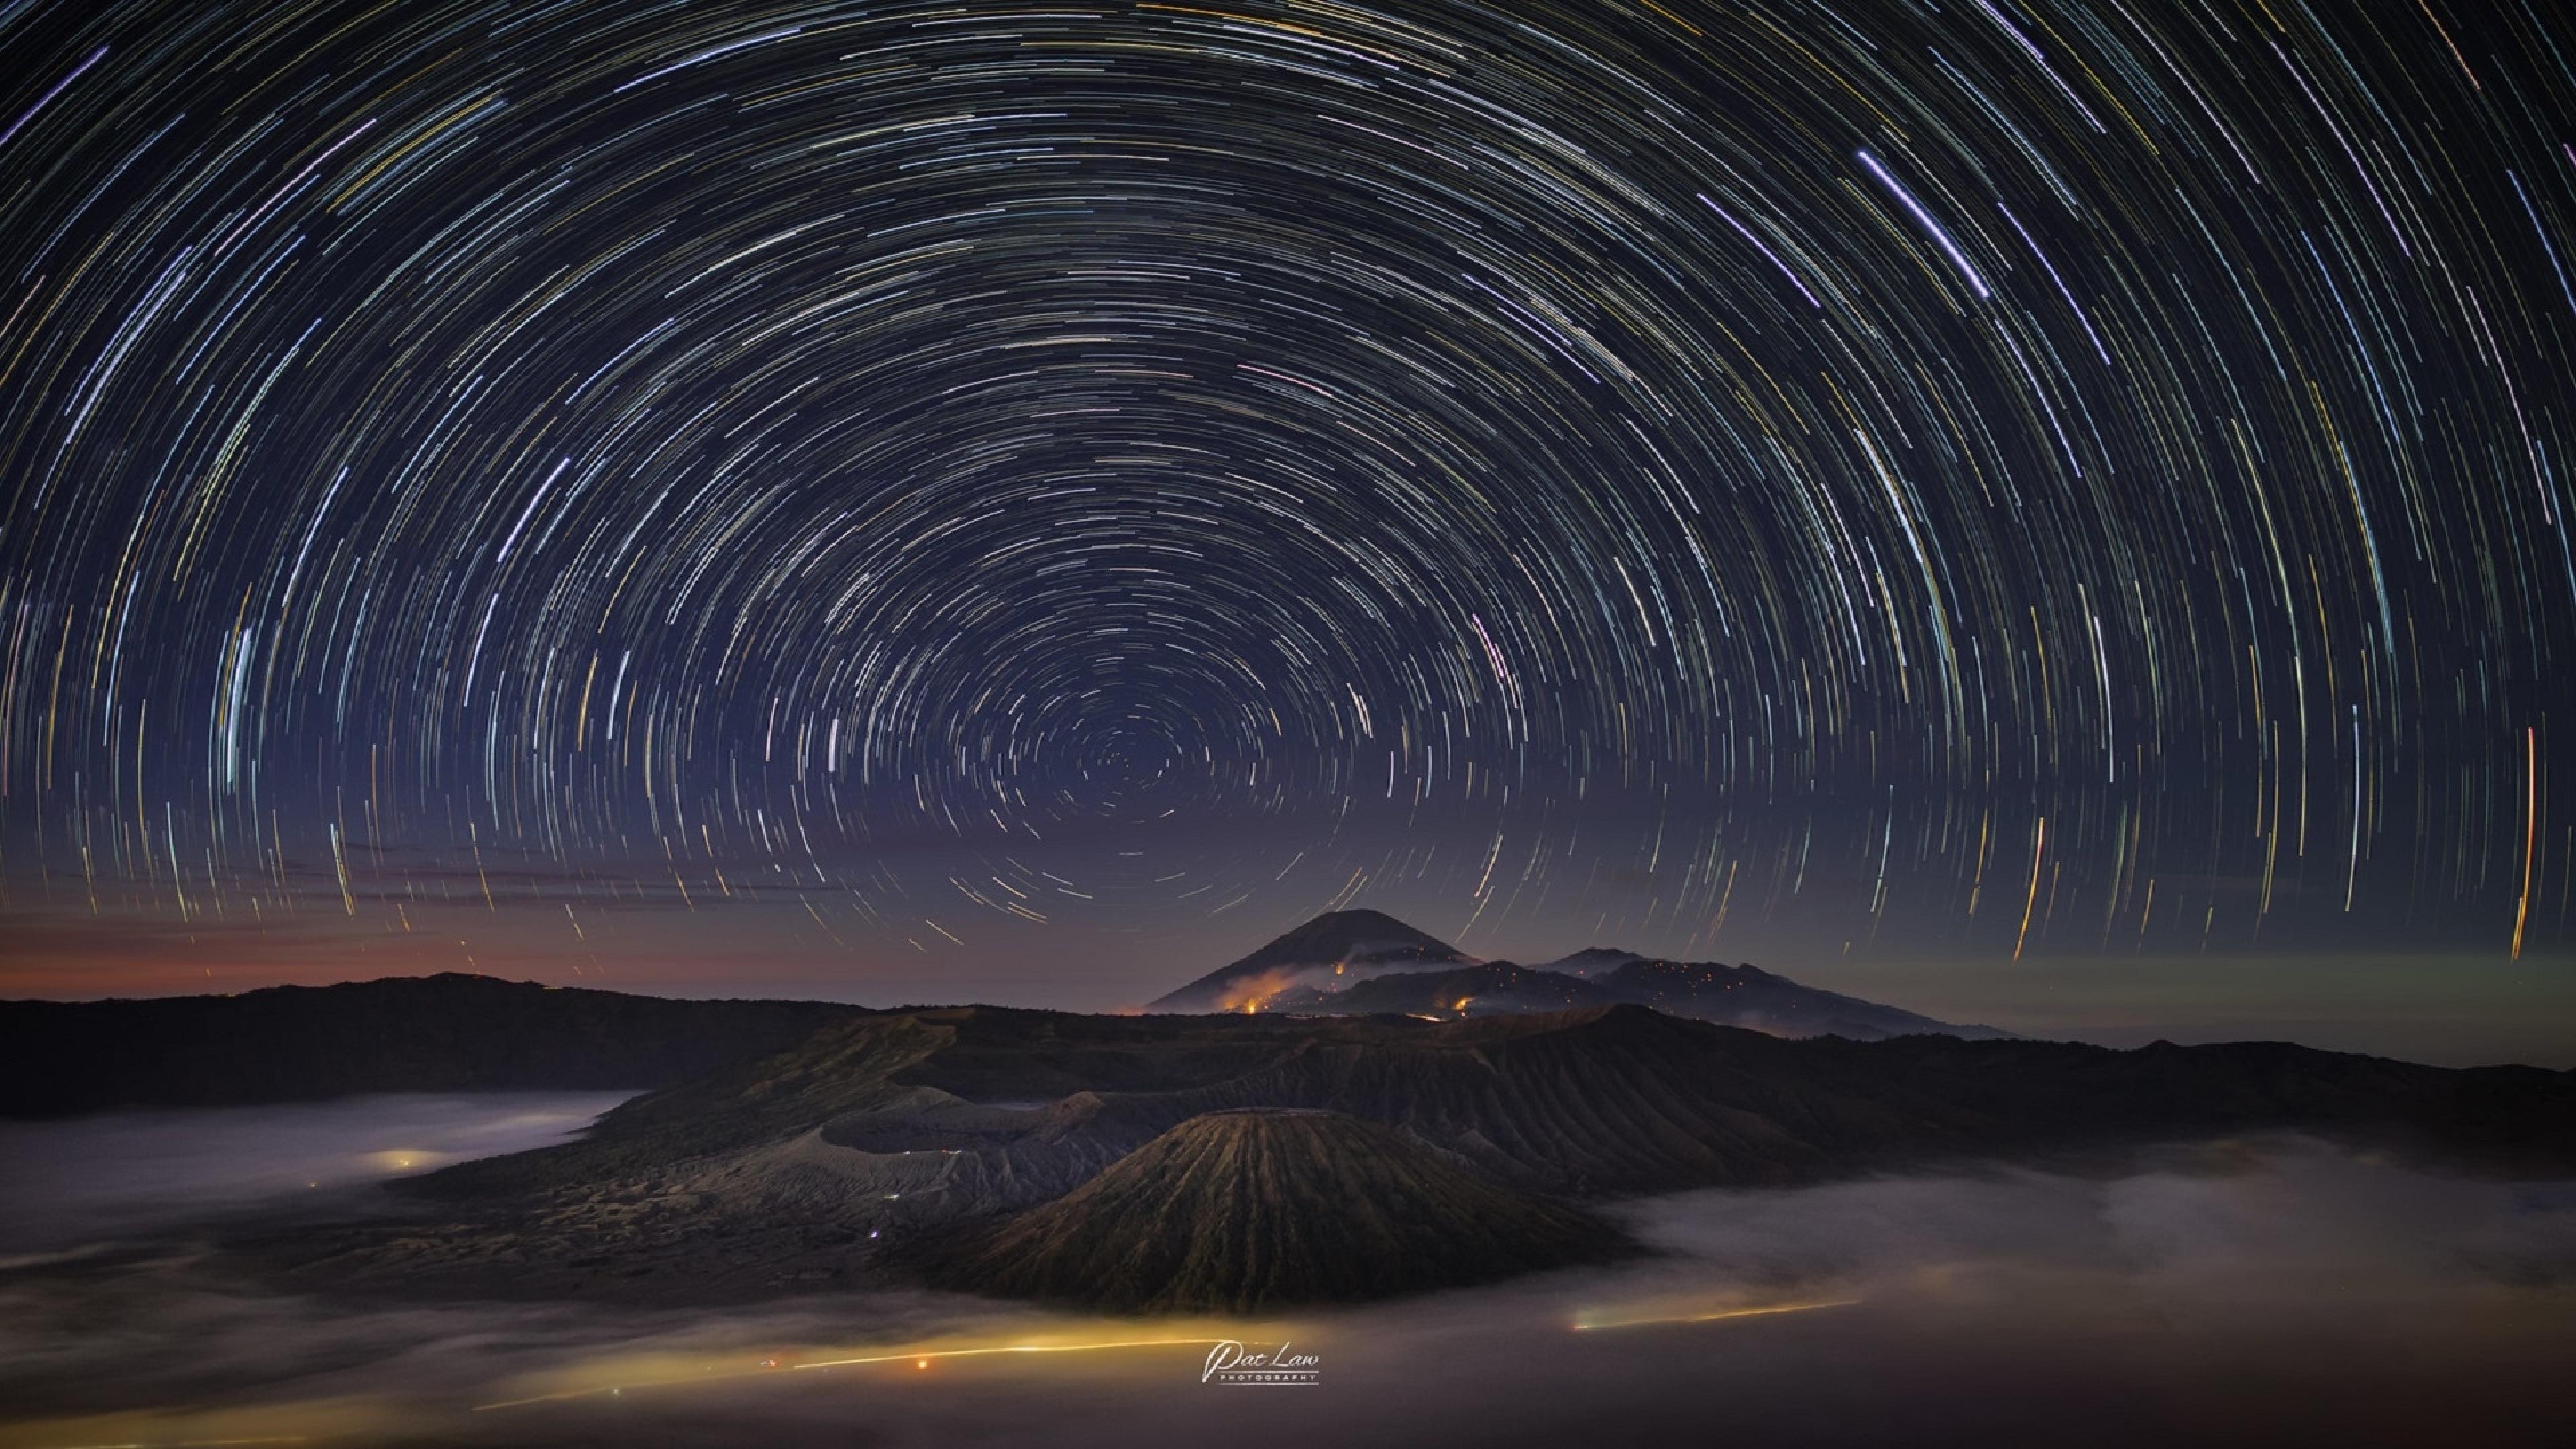 15 Greatest 4k wallpaper night sky You Can Get It Without A Penny ...